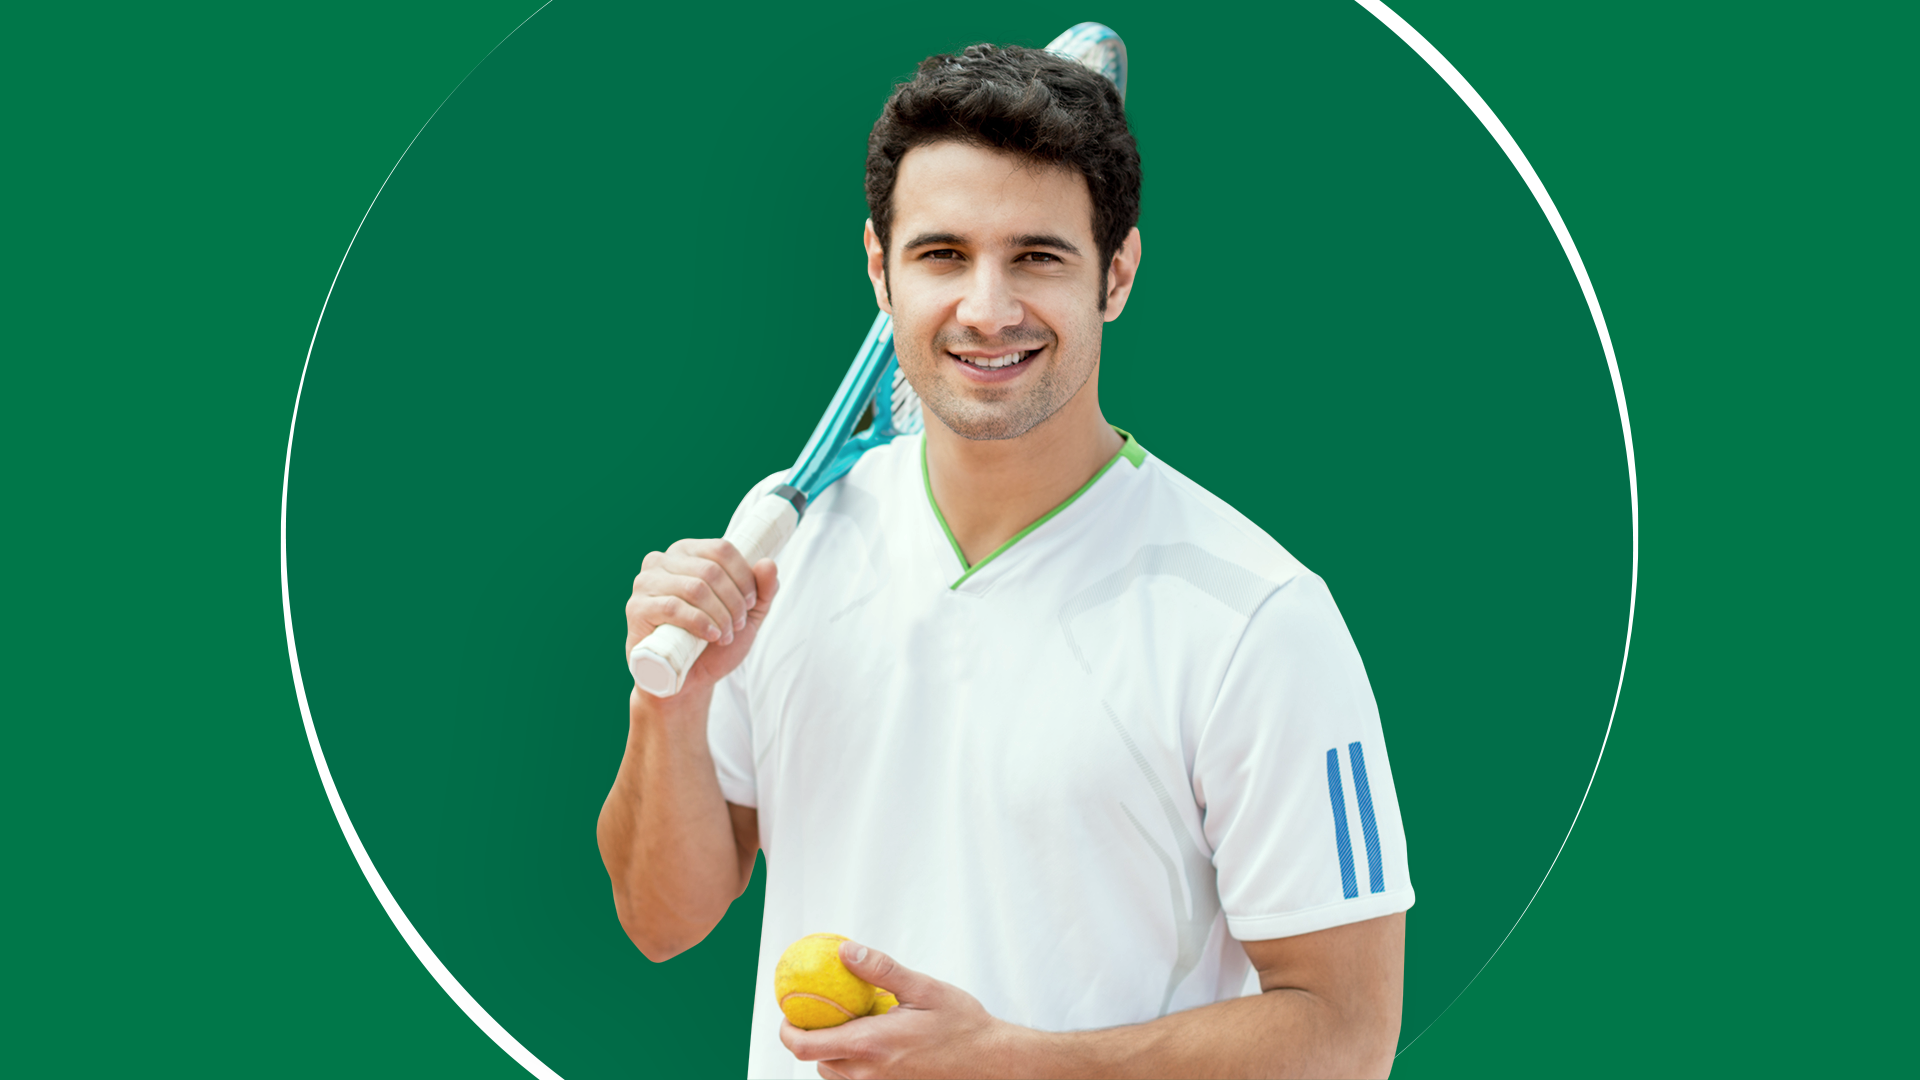 Young tennis player smiling at the camera. Young tennis player holding a racket in his right hand and two tennis balls in his left hand, smiling at the camera